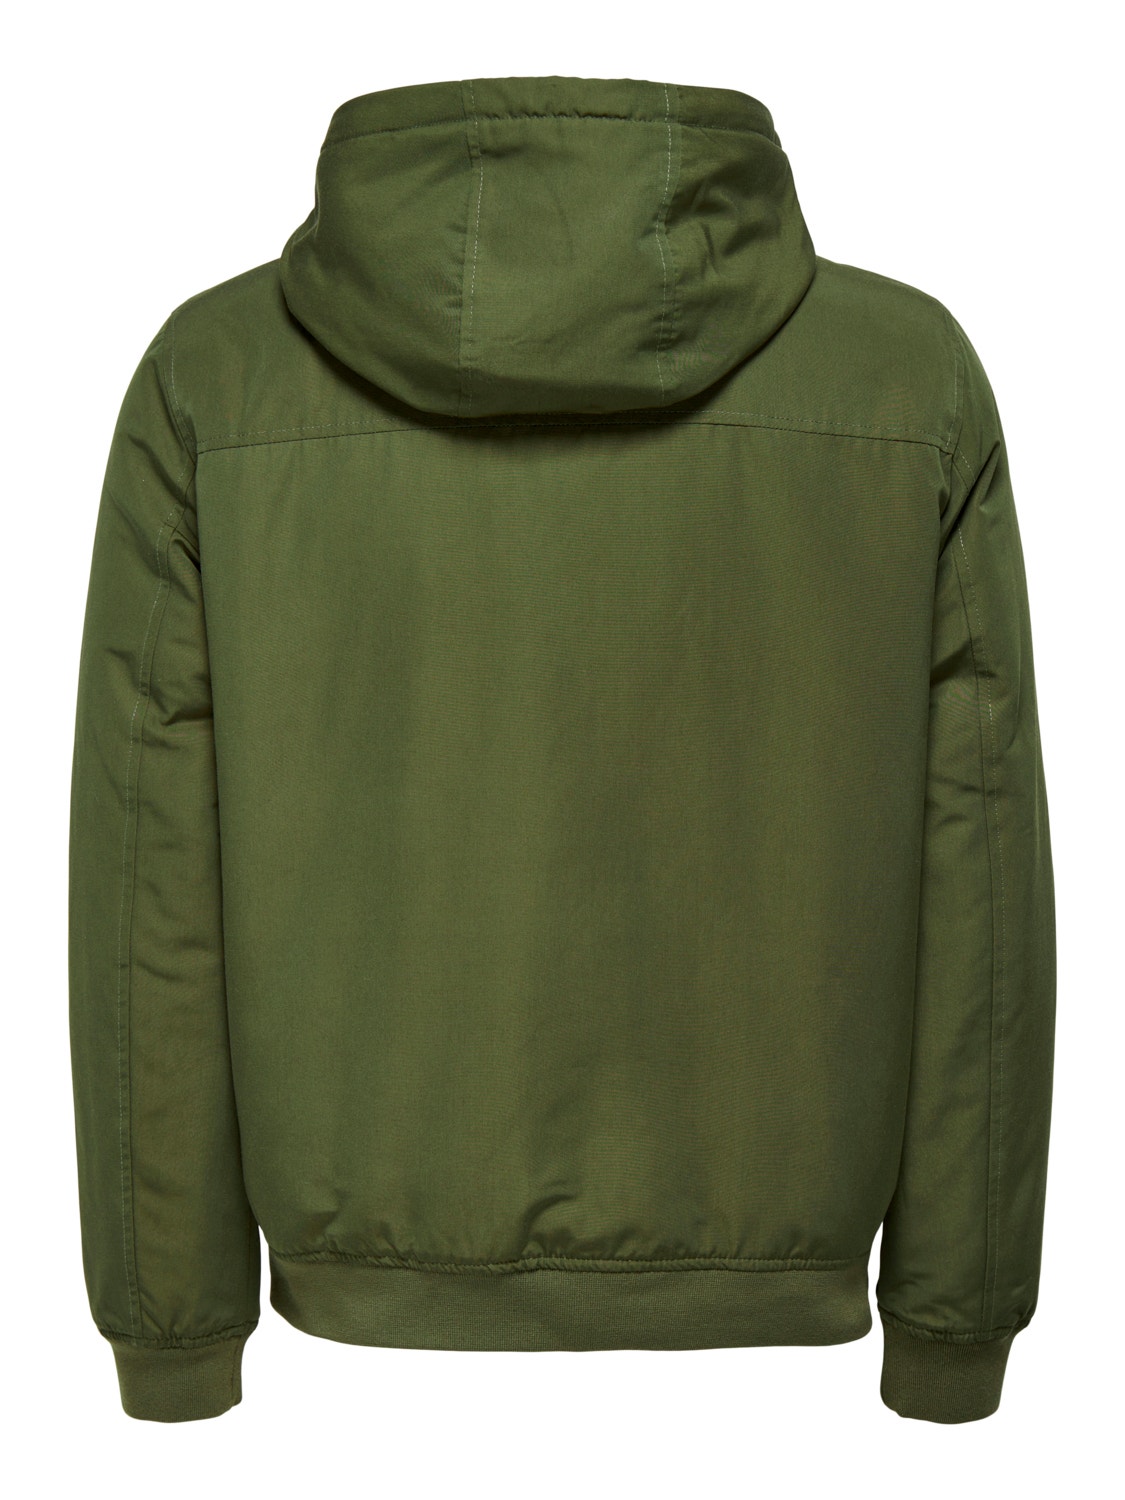 ONLY & SONS Hood with string regulation Jacket -Olive Night - 22023335